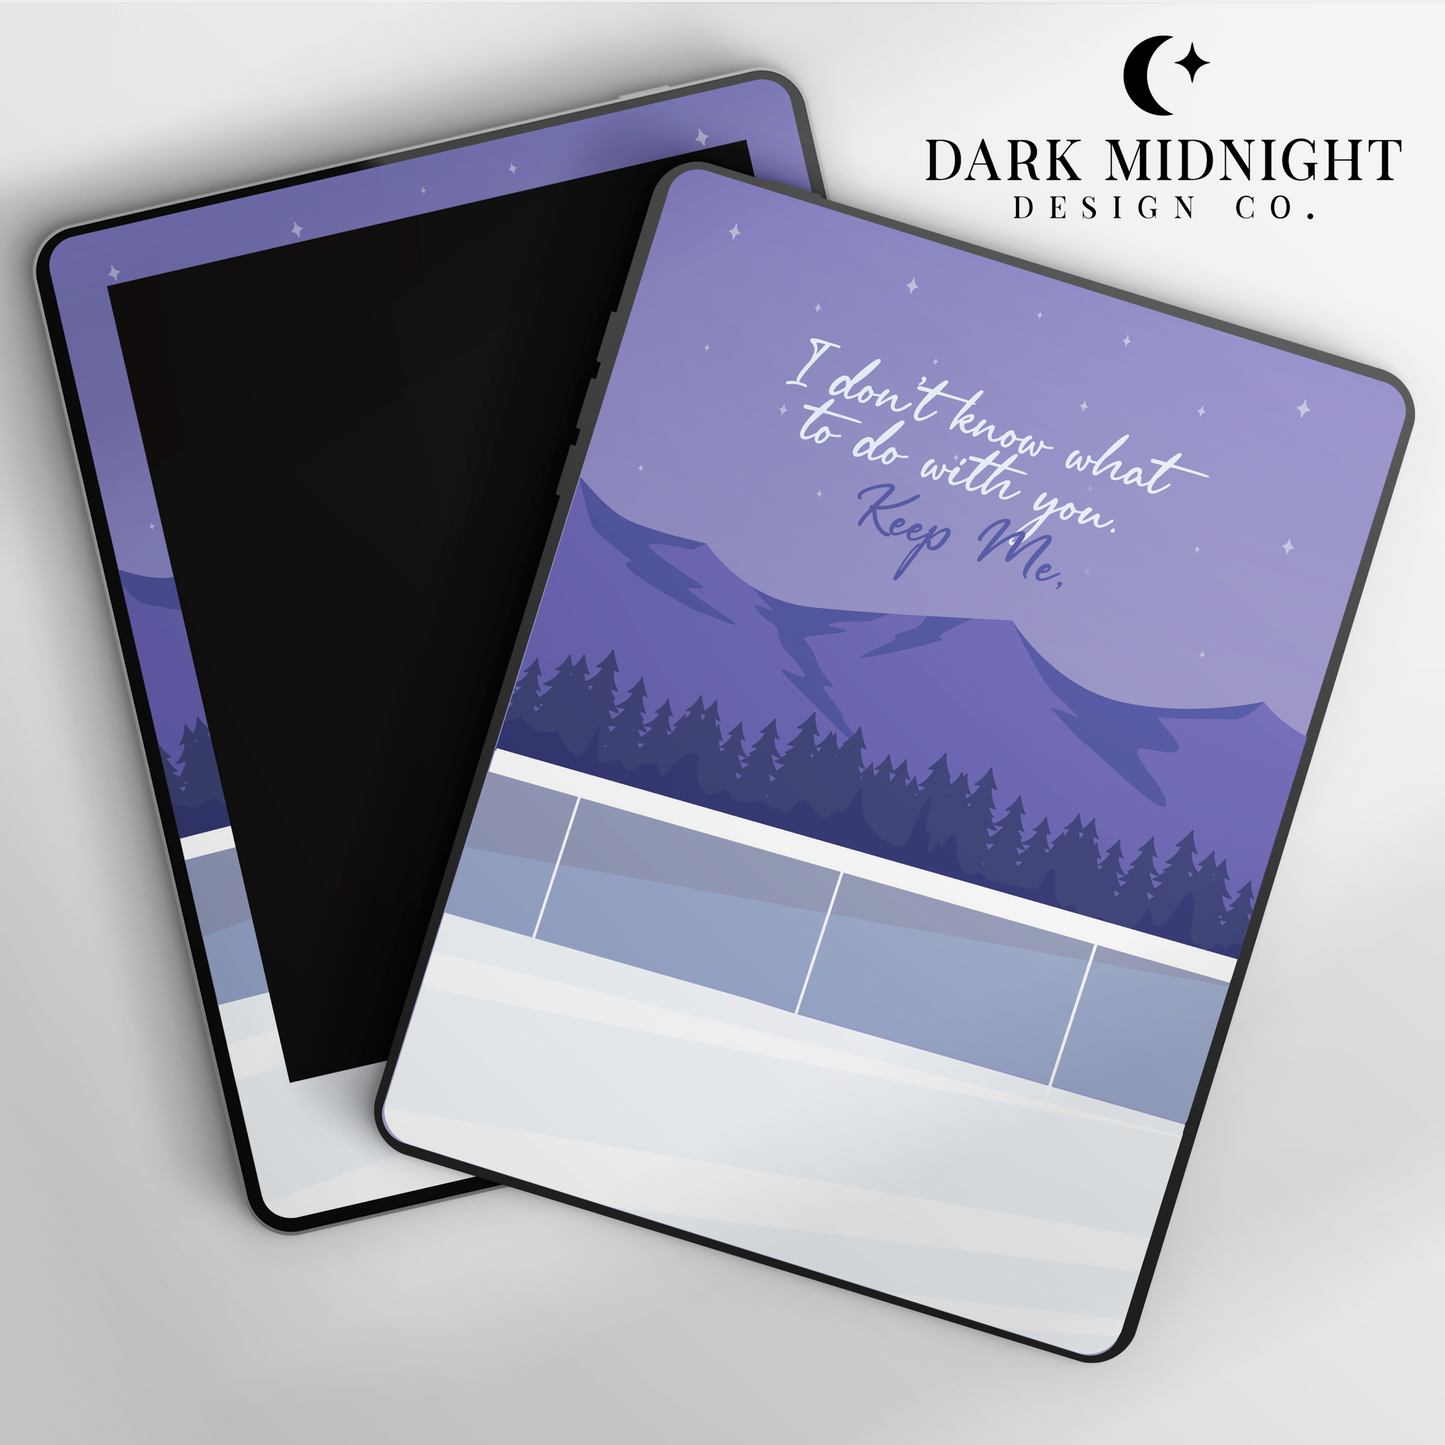 What Am I Going To Do With You? Kindle Wrap Kindle Paperwhite Vinyl Wrap - Officially Licensed Vancouver Storm Series